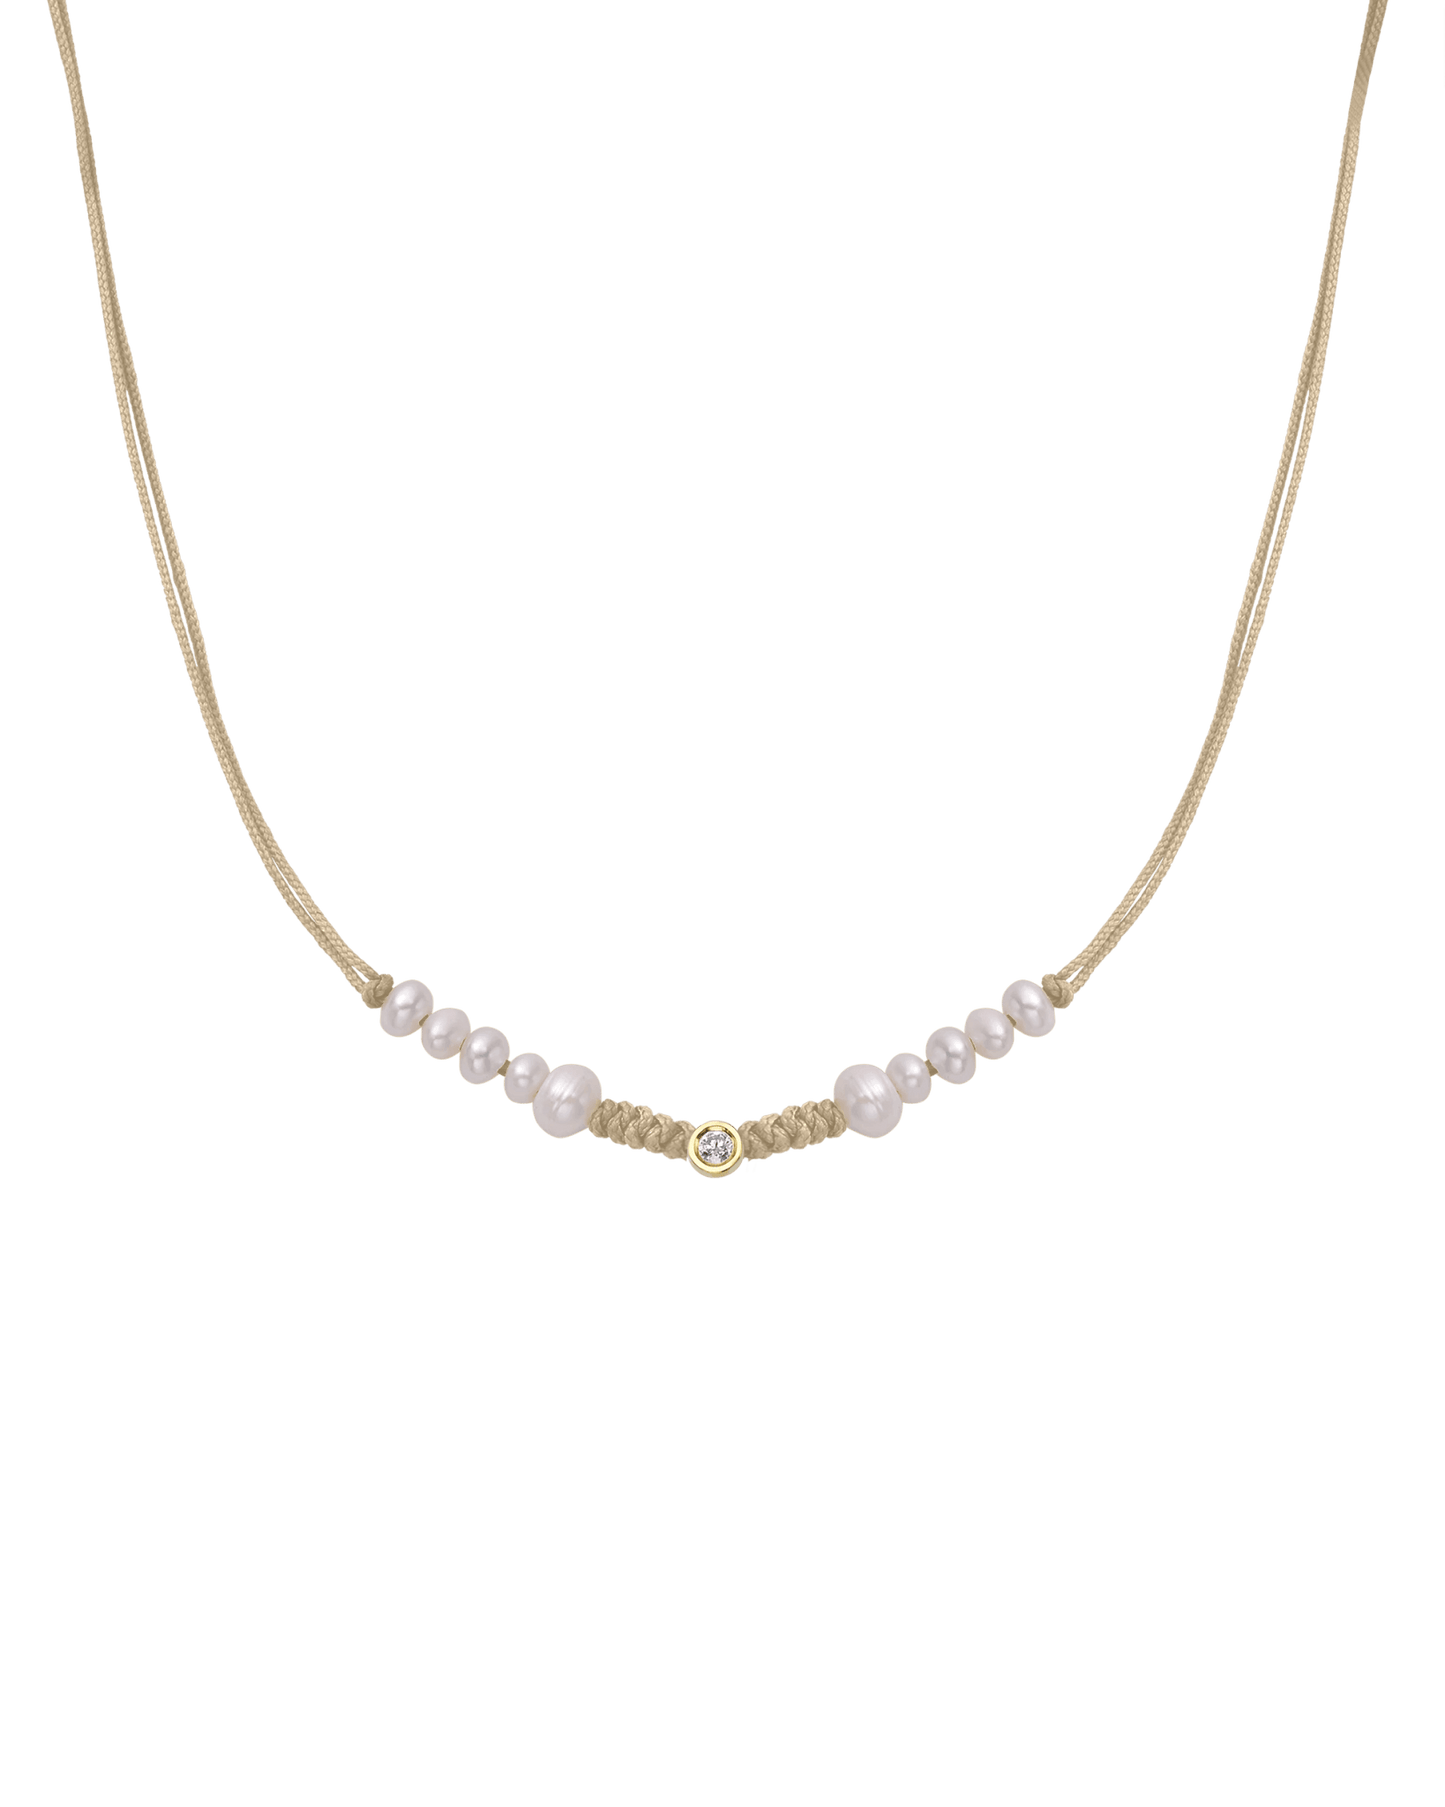 Ten Natural Pearl String of Love Necklace - 14K Yellow Gold Necklaces 14K Solid Gold Beige Medium: 0.04ct 